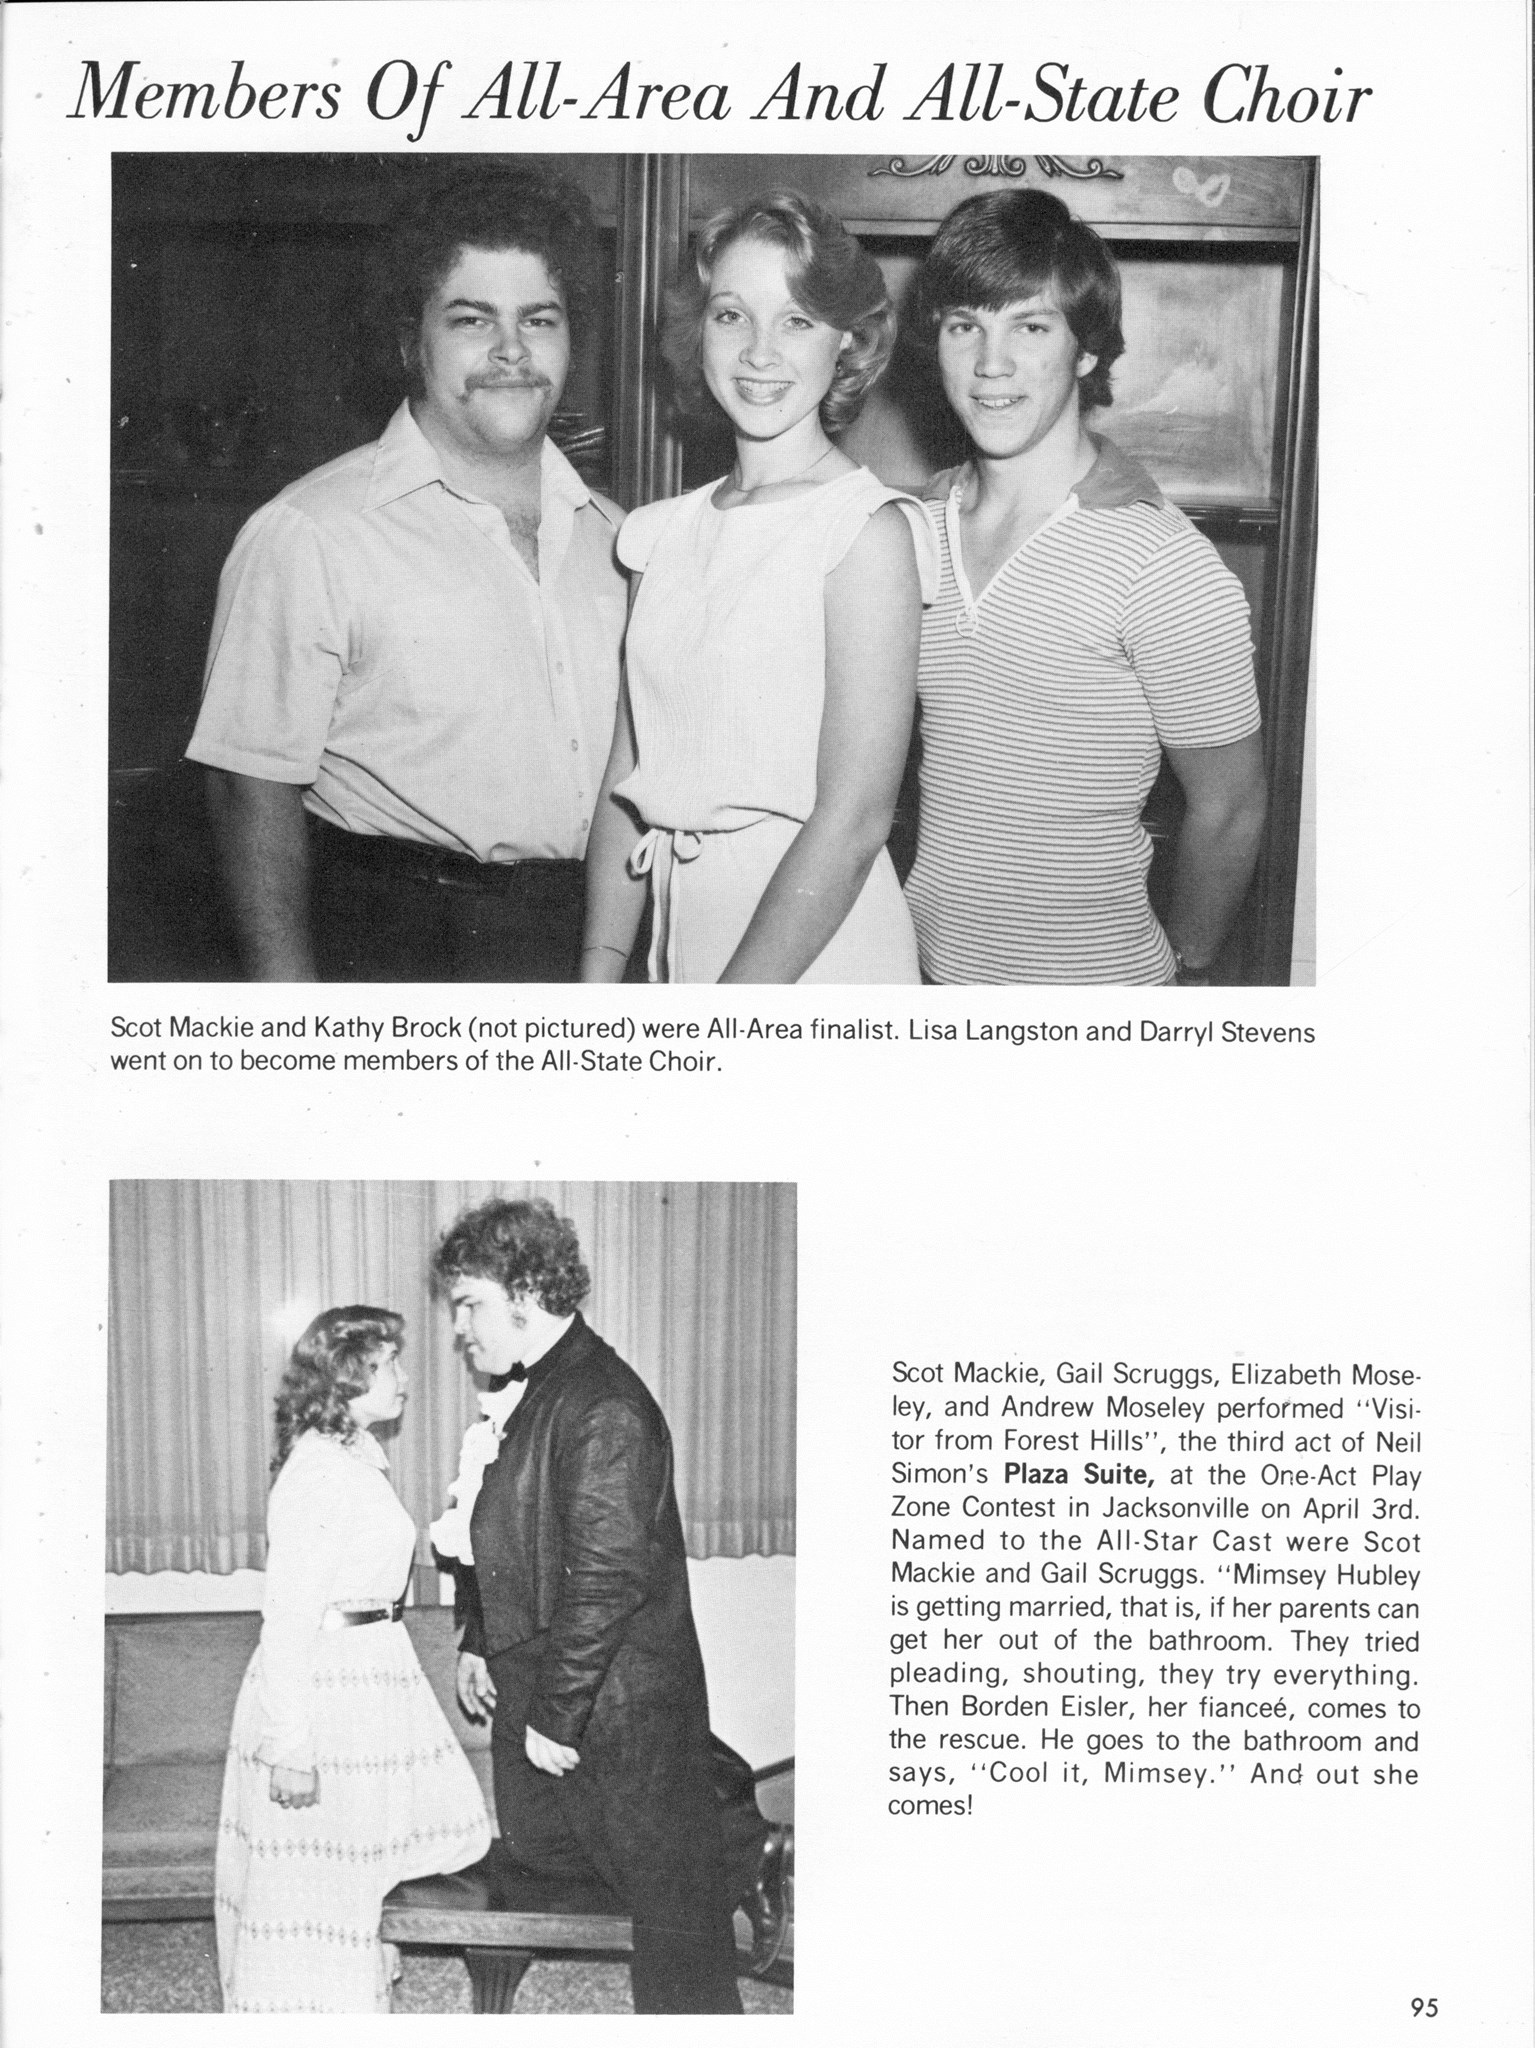 ../../../Images/Large/1978/Arclight-1978-pg0095.jpg